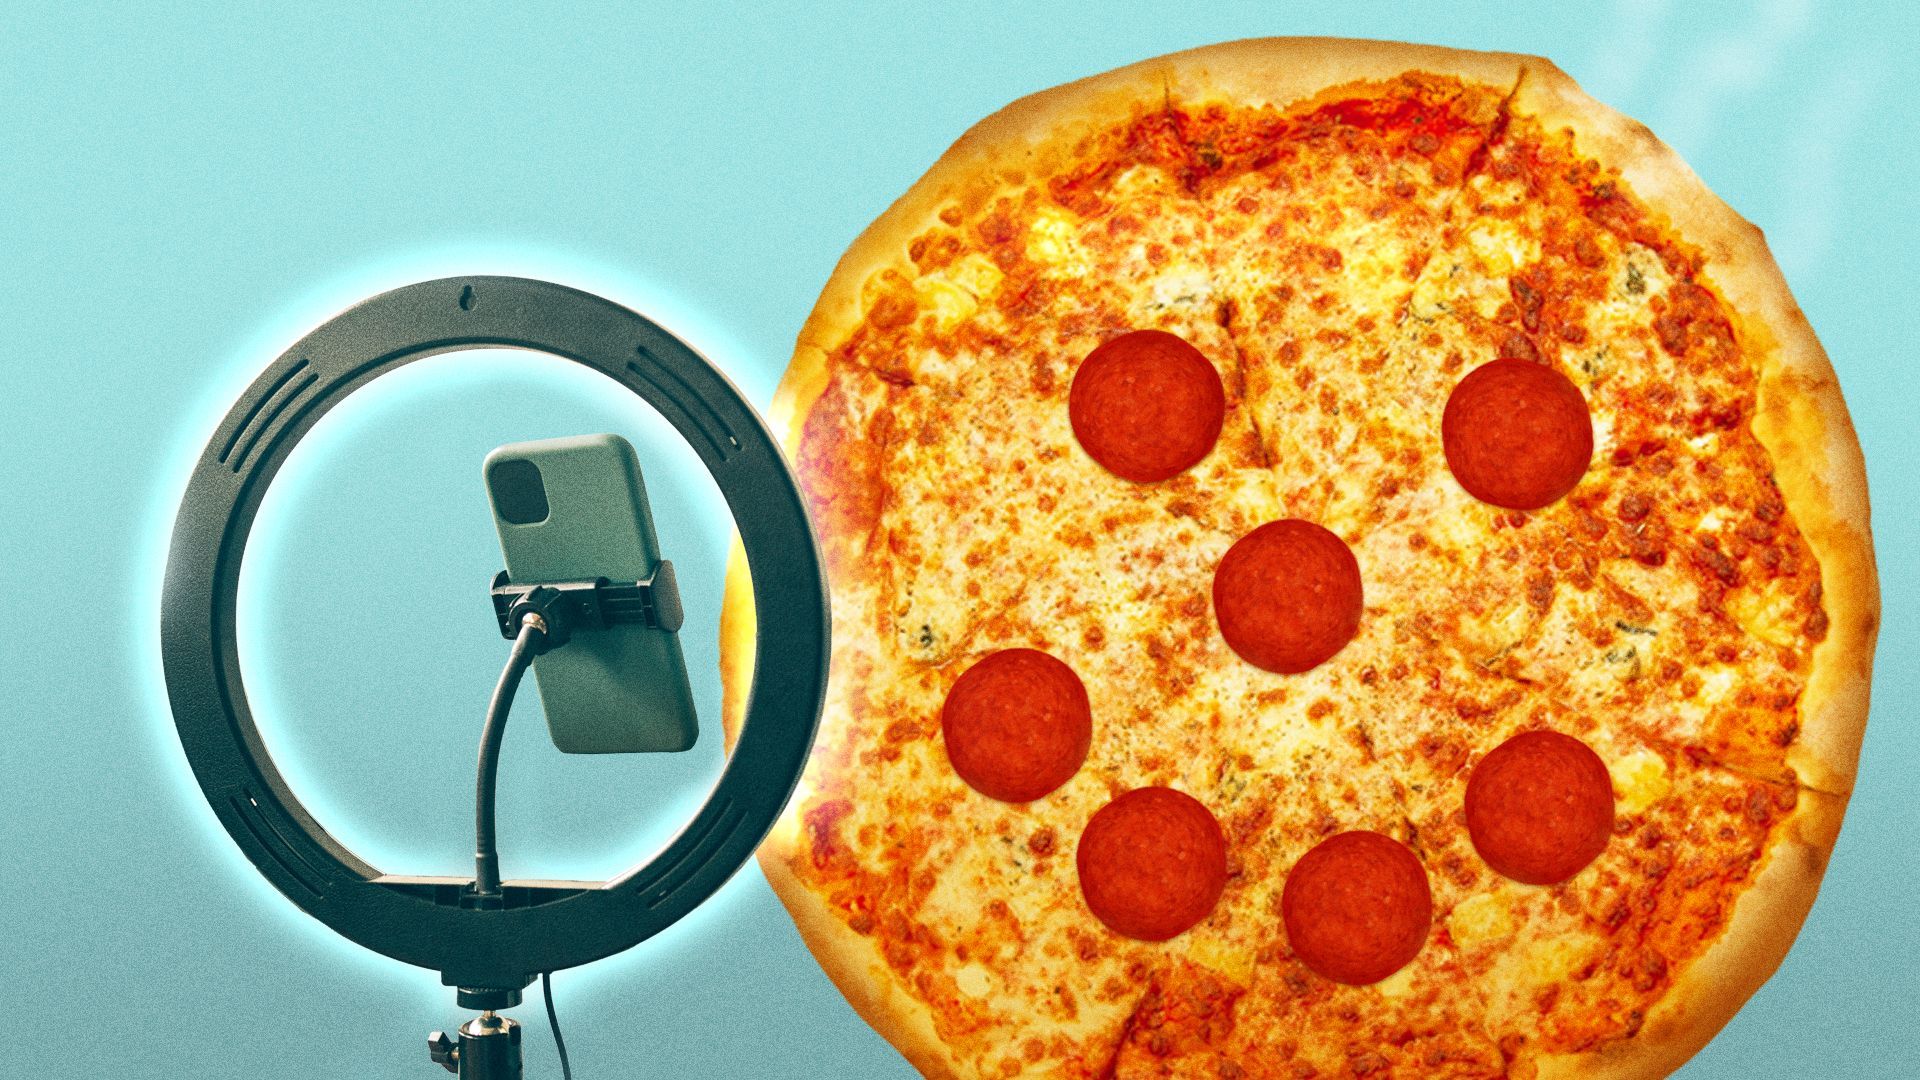 Illustration of a ring light shining on a pizza with pepperoni slices forming a smiley face.